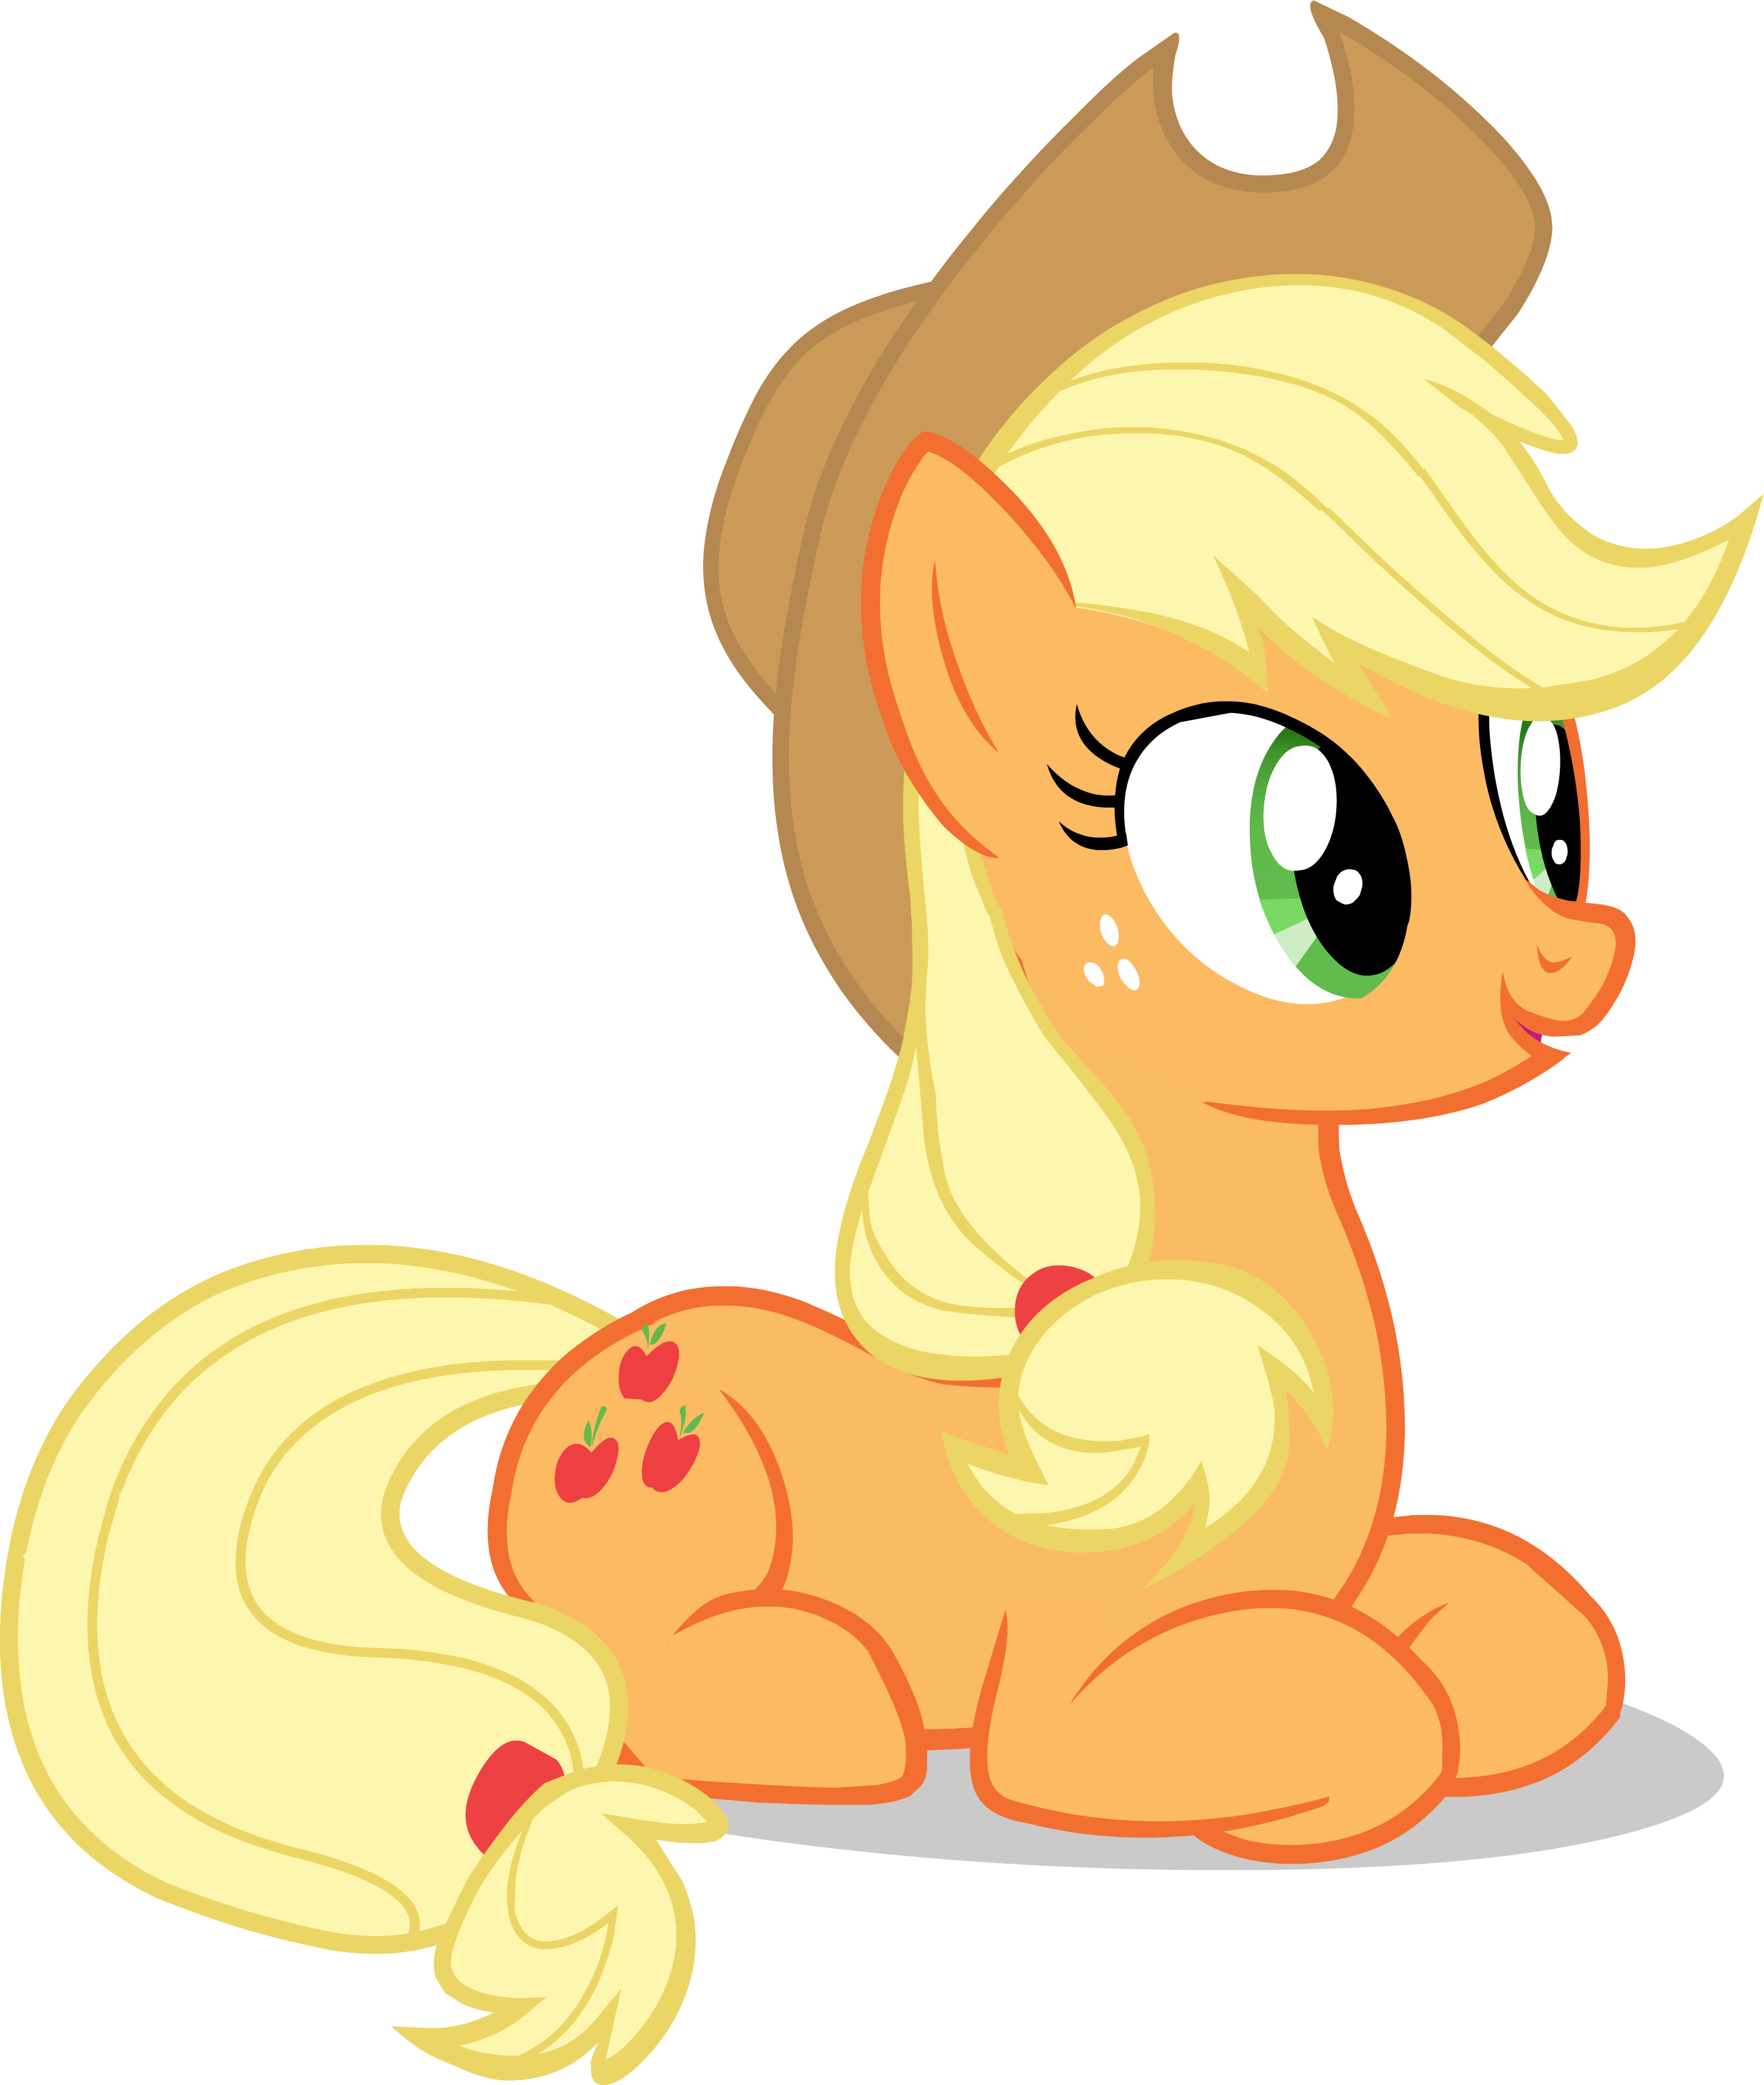 This visual is about applejack mlp freetoedit #applejack #mlp #freetoedit.